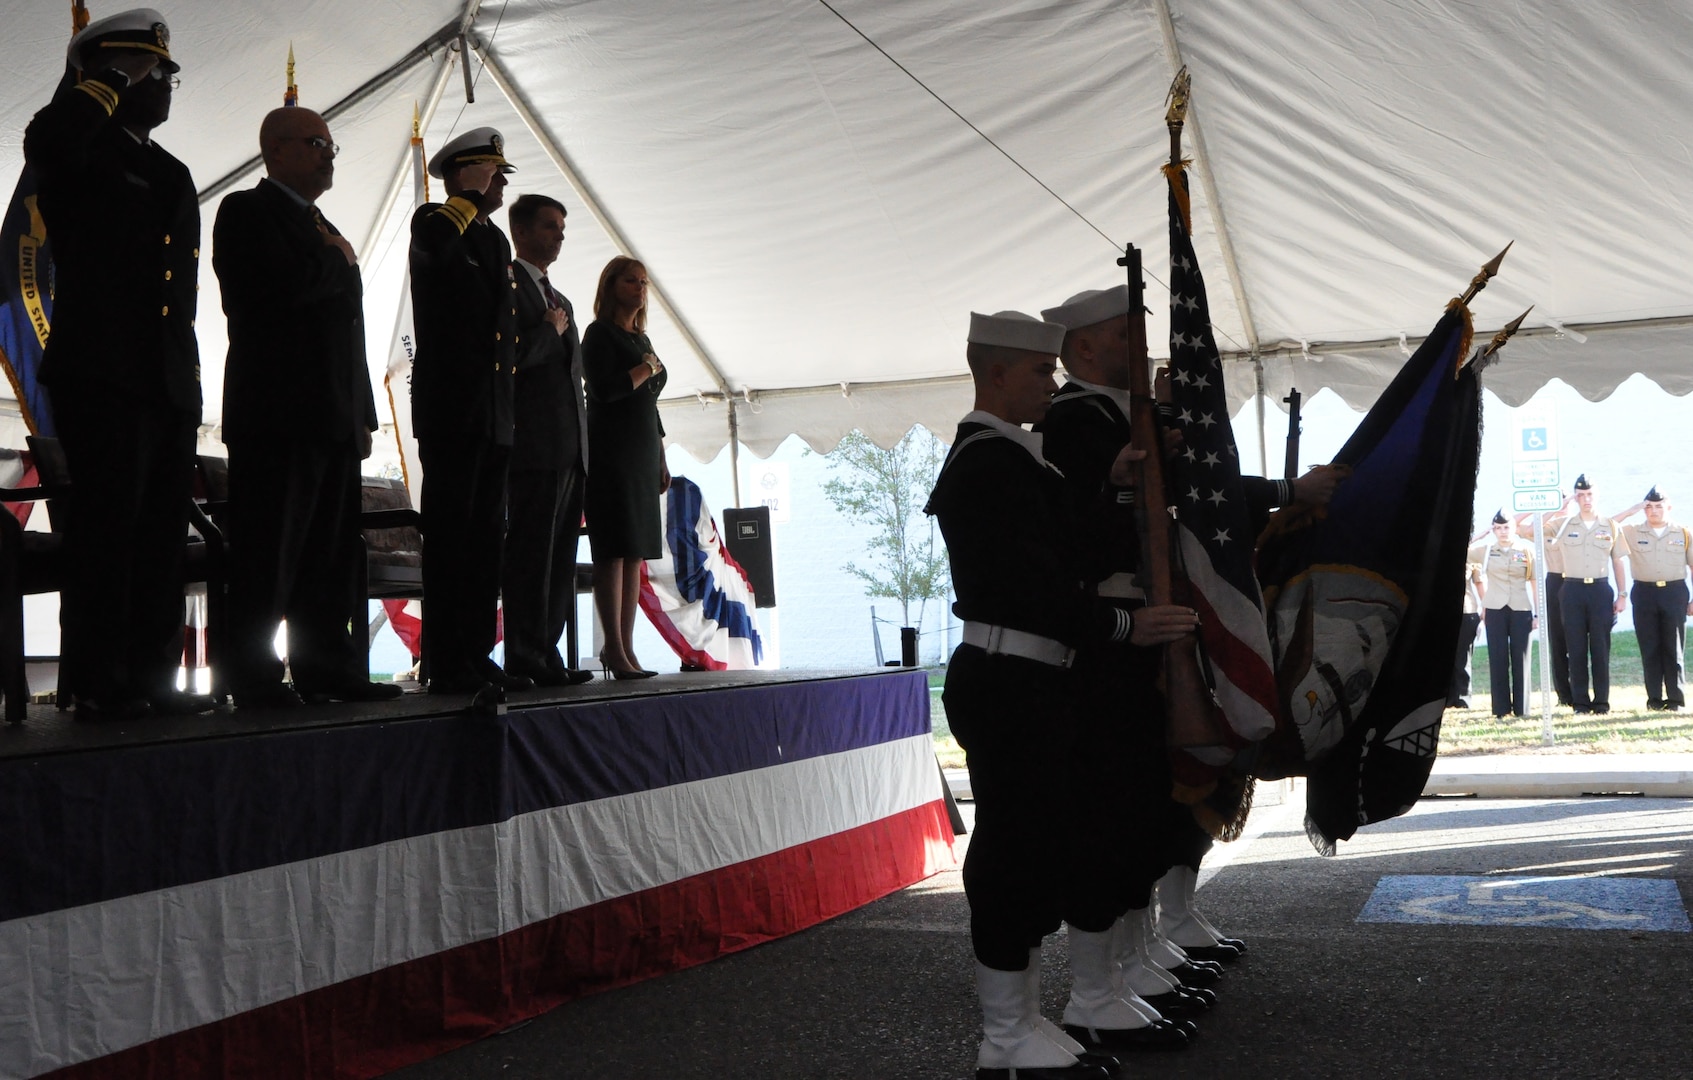 IMAGE: DAHLGREN, Va. (Nov. 1, 2018) – The Aegis Training and Readiness Center Ceremonial Color Guard presents colors during the national anthem at the ribbon-cutting ceremony for the Navy’s Missile Support Facility. In the background are King George High School Junior Reserve Officer Training Corps cadets while on stage stand the event’s guest speakers and the chaplain who gave the invocation. The facility features state-of-the-art labs, offices, and equipment for more than 300 NSWCDD Strategic and Computing Systems Department scientists, engineers, and technical experts who develop, test, and maintain the Submarine Launched Ballistic Missile fire control and mission planning software.